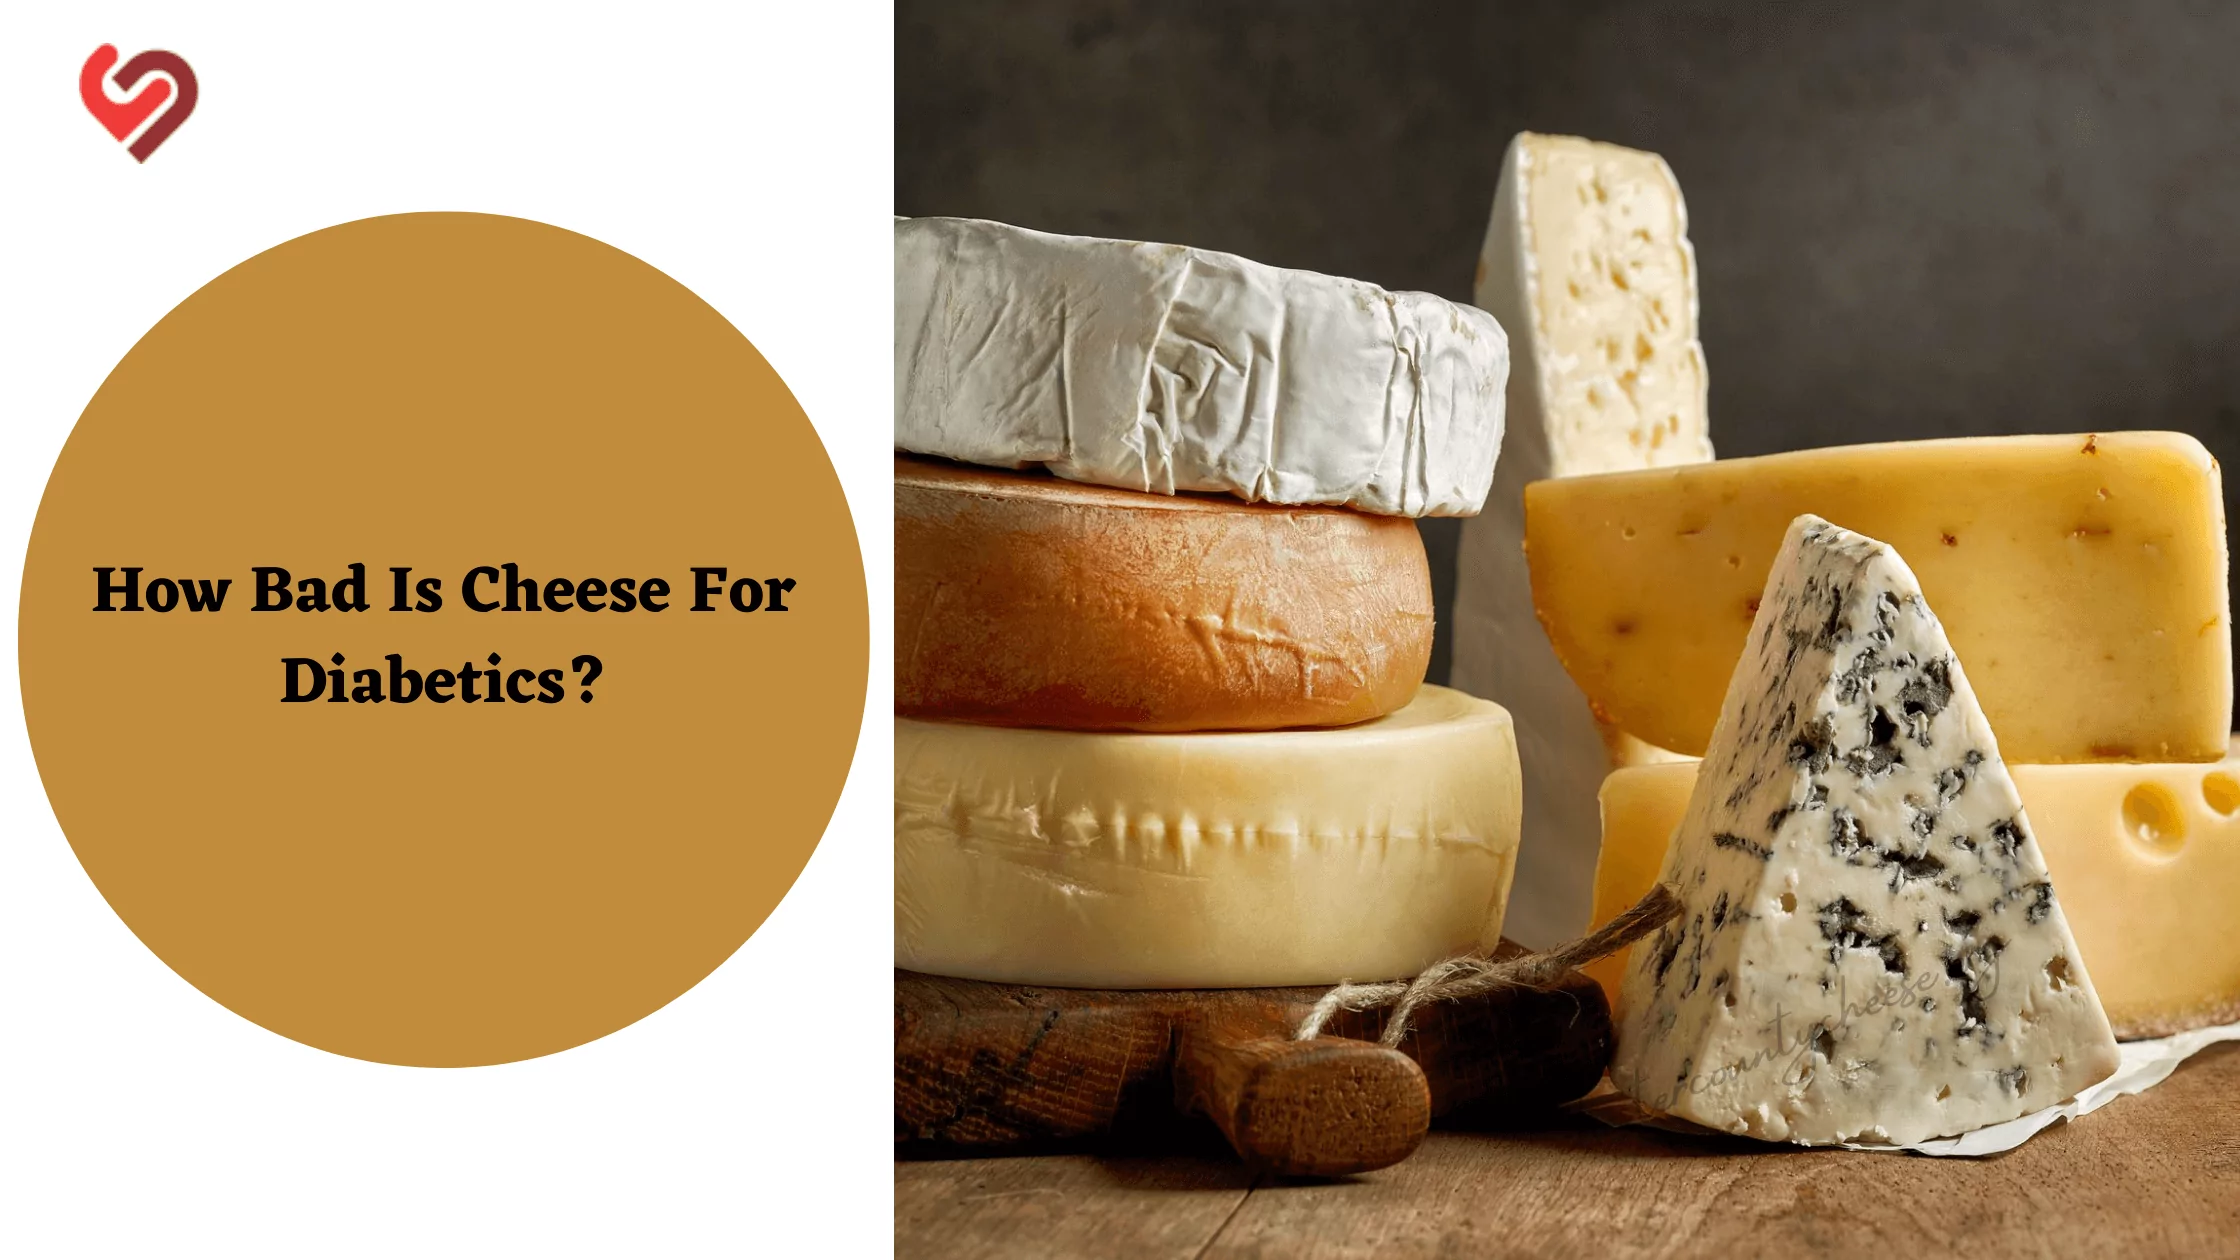 How Bad Is Cheese For Diabetics